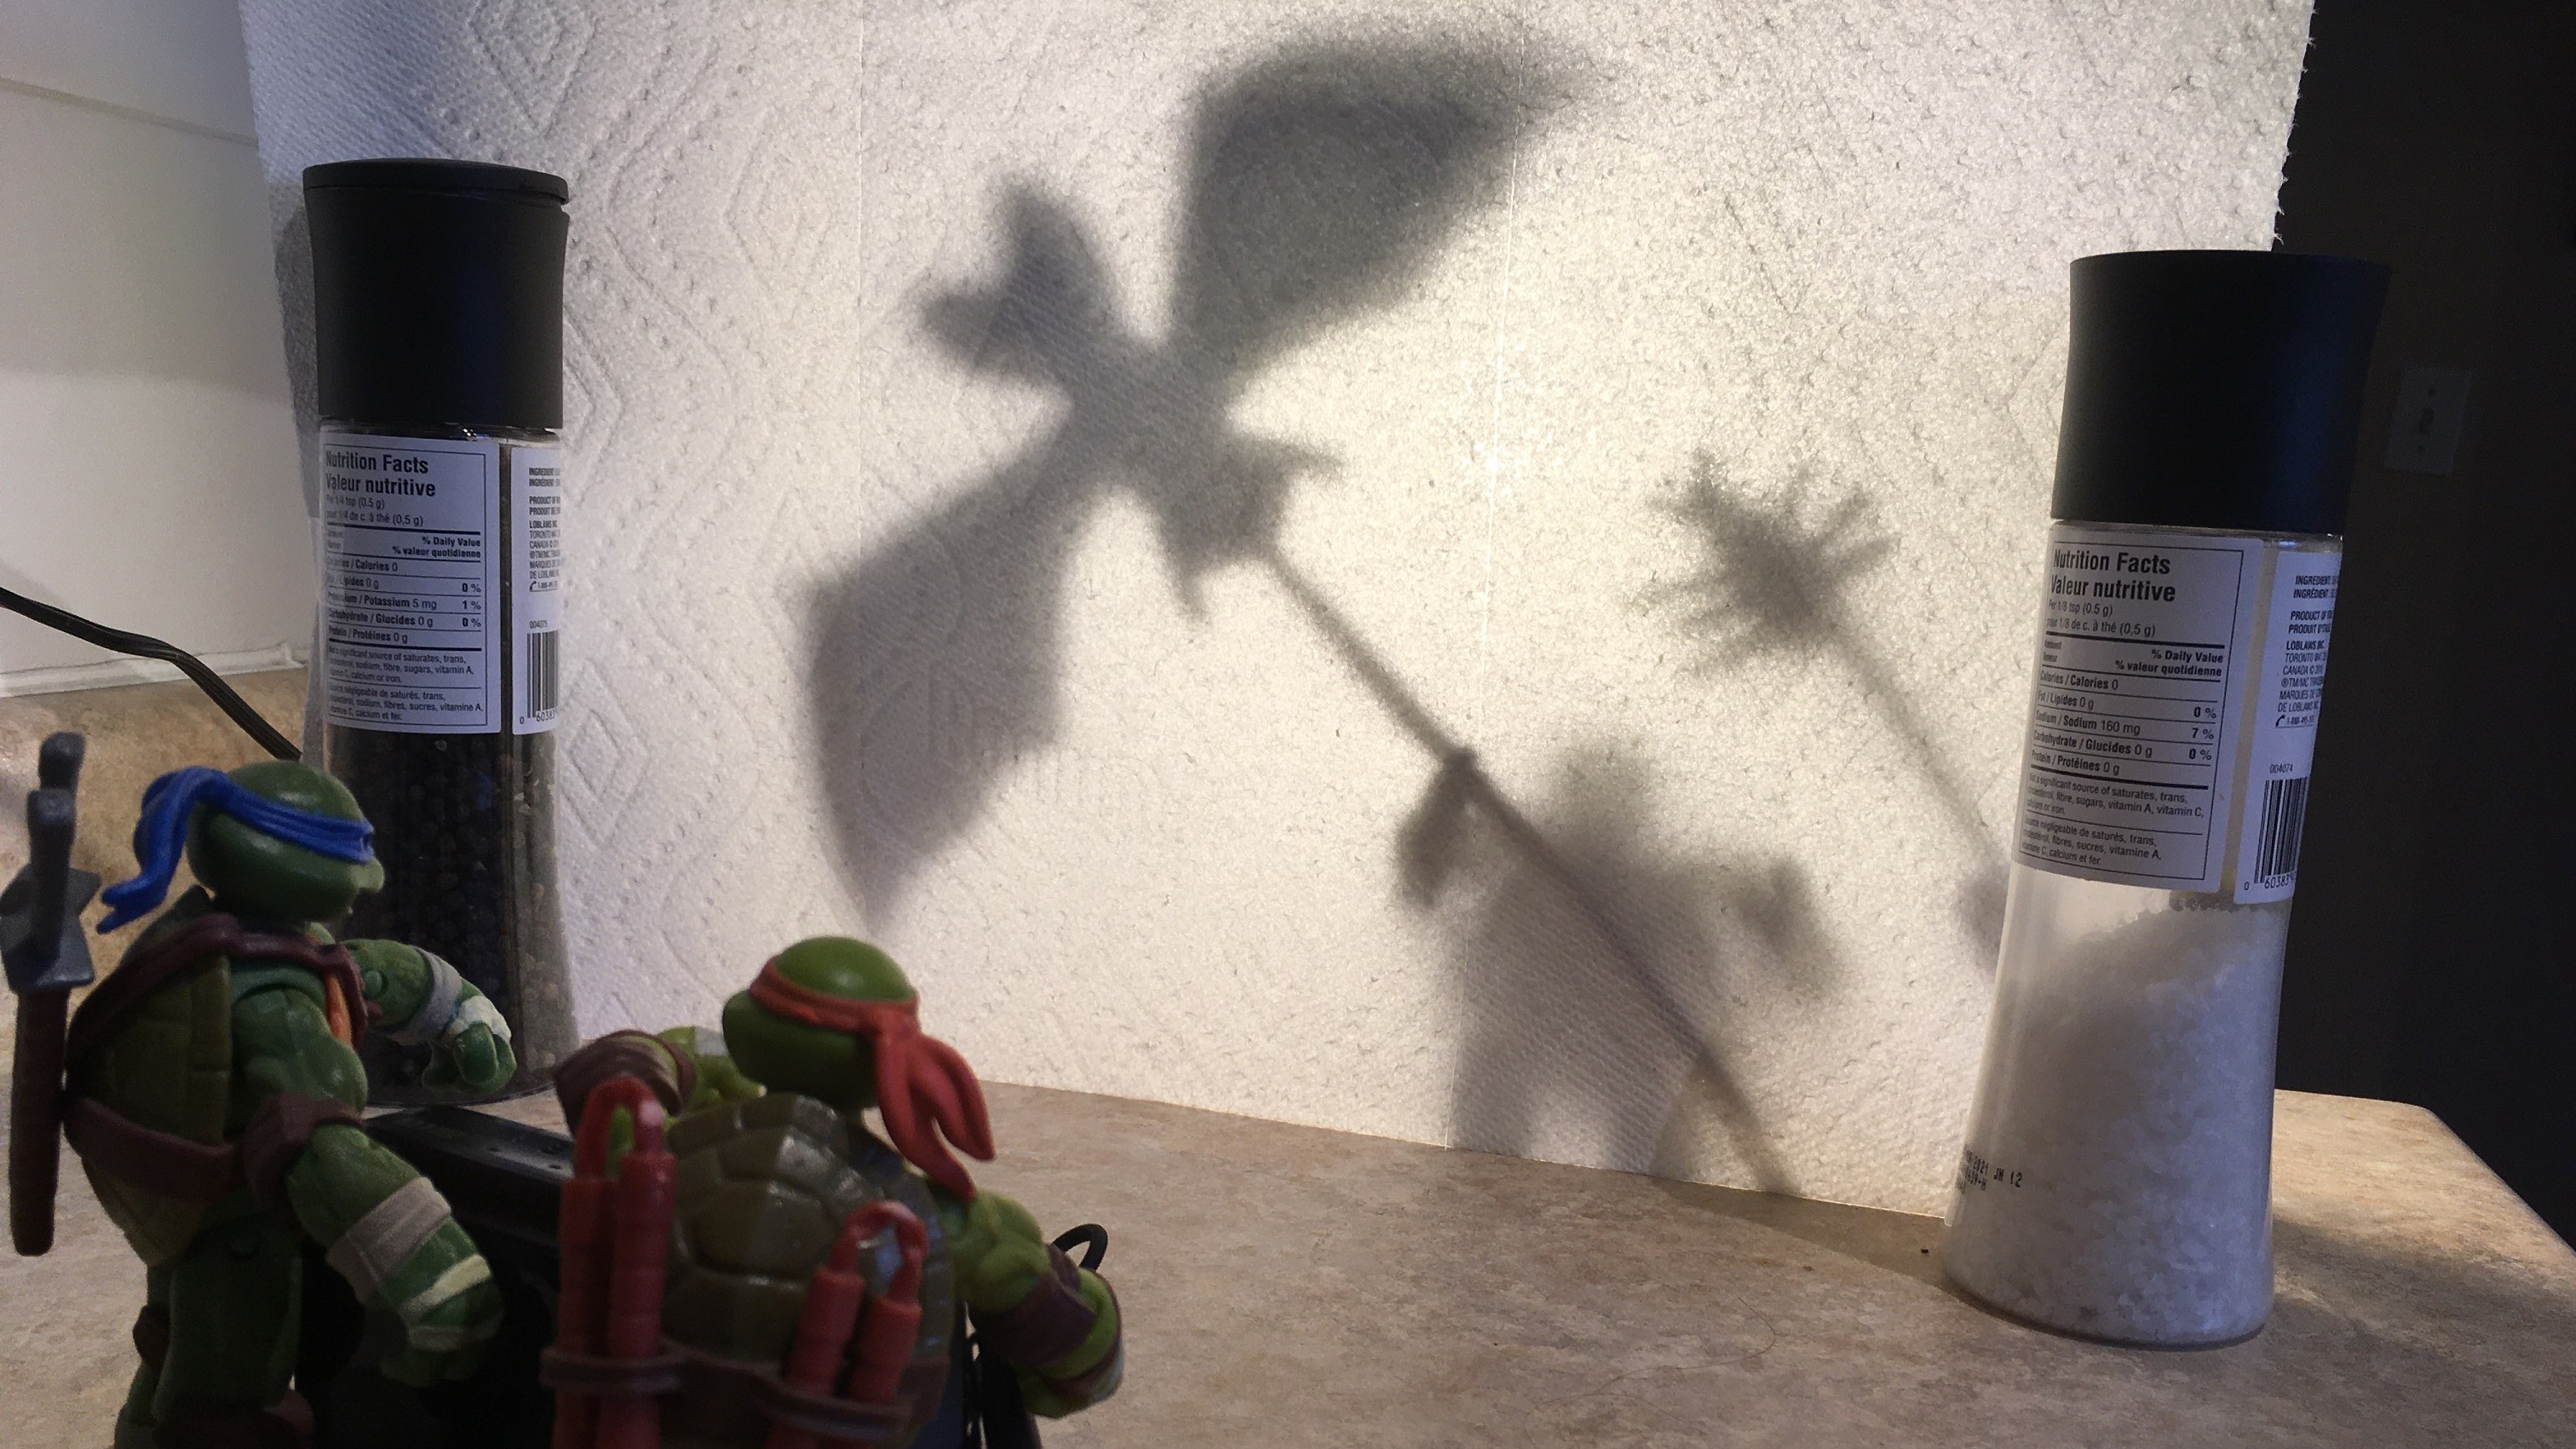 Two action figures with a camera record a shadow play of a bat and a cockroach.